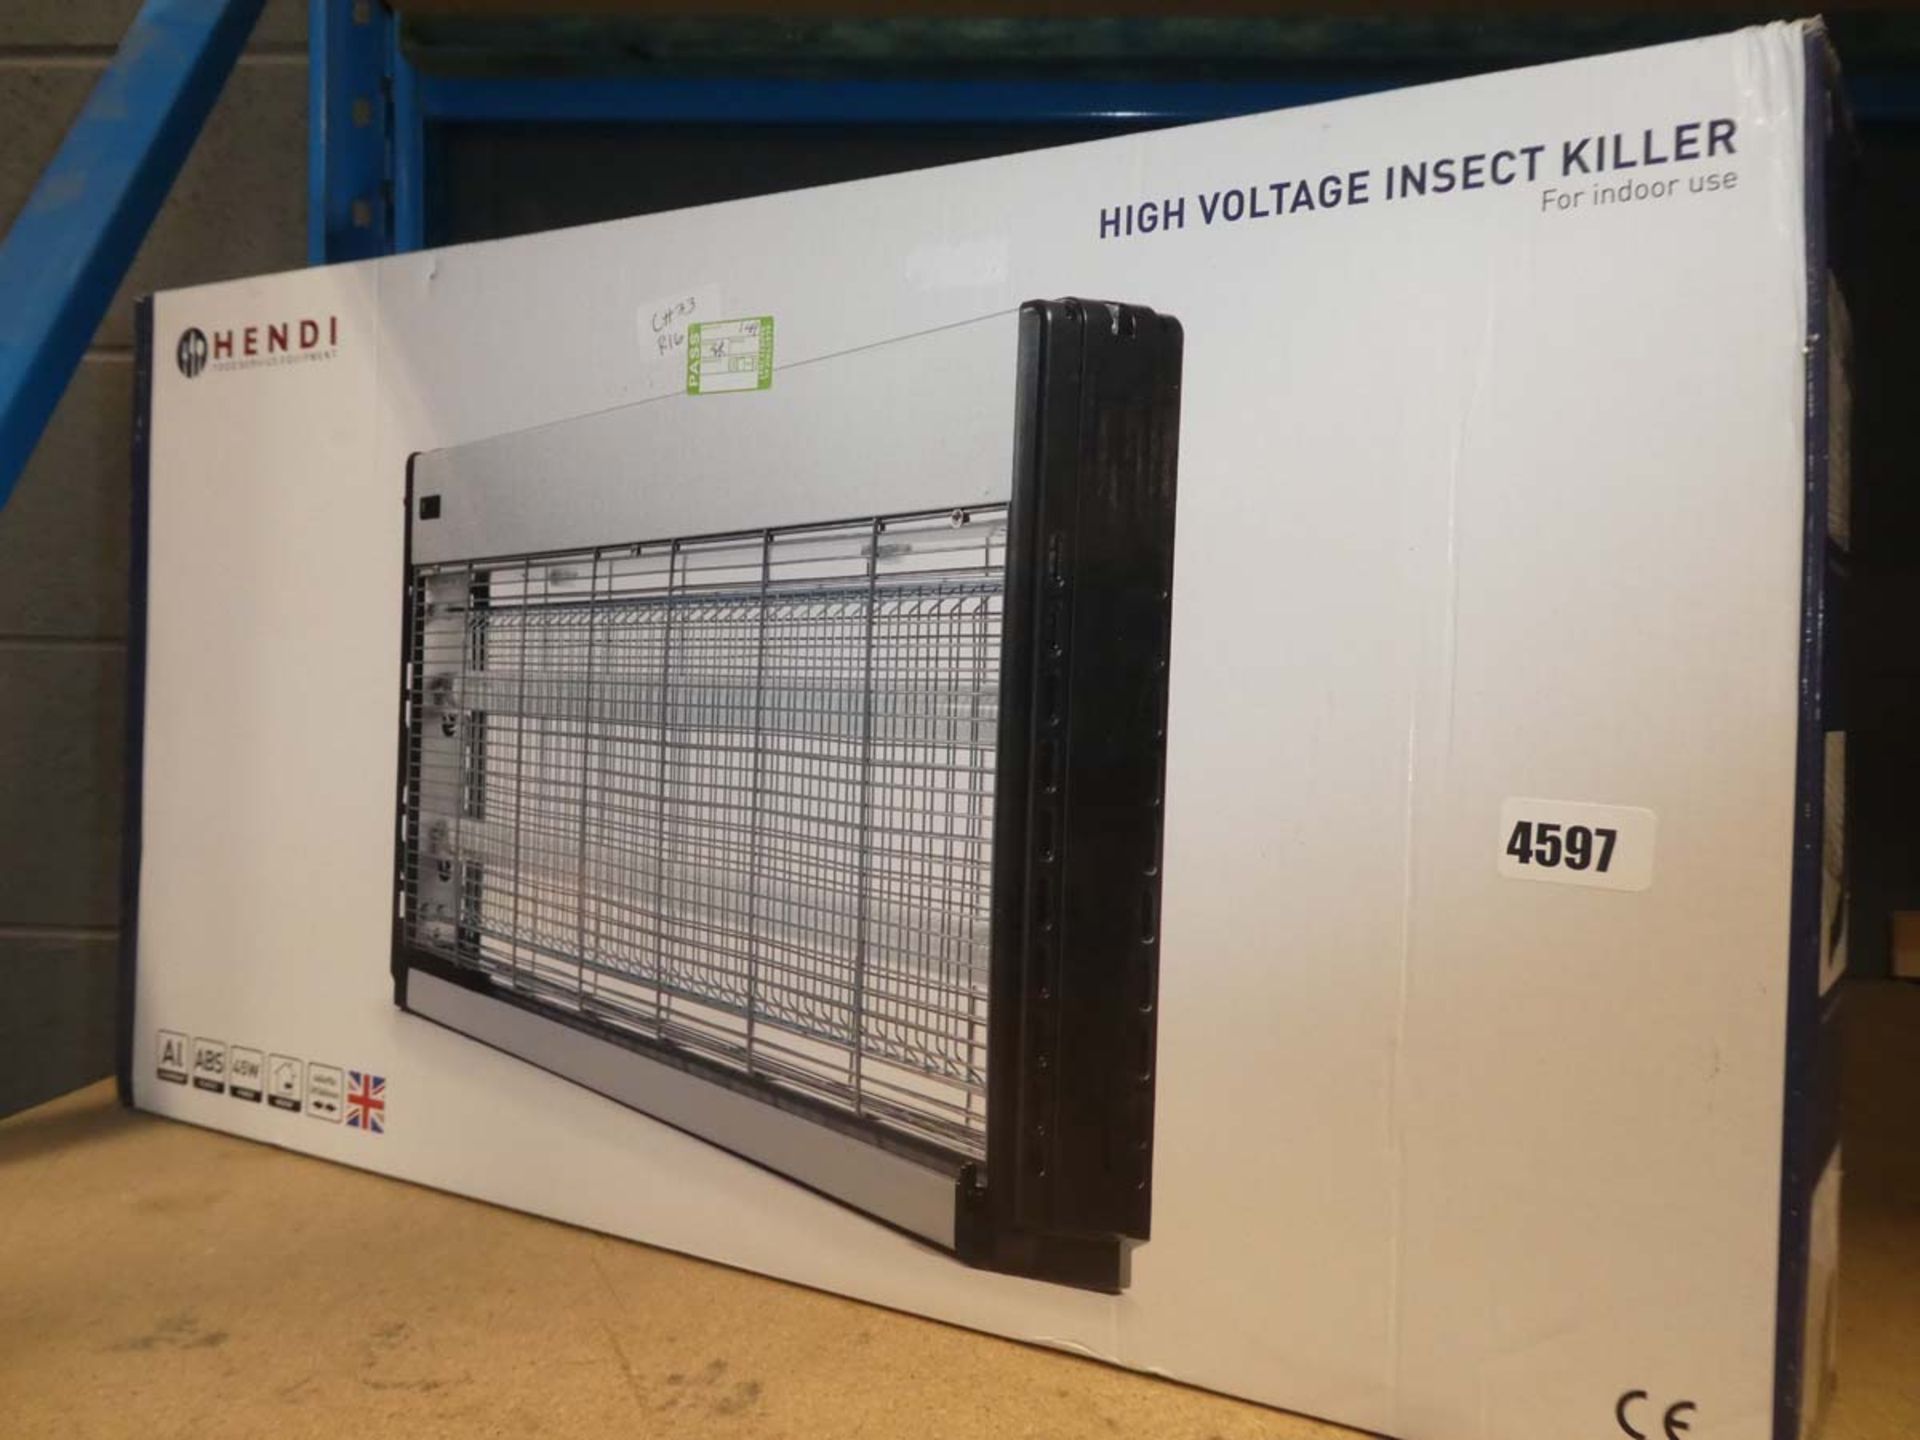 High voltage insect killer